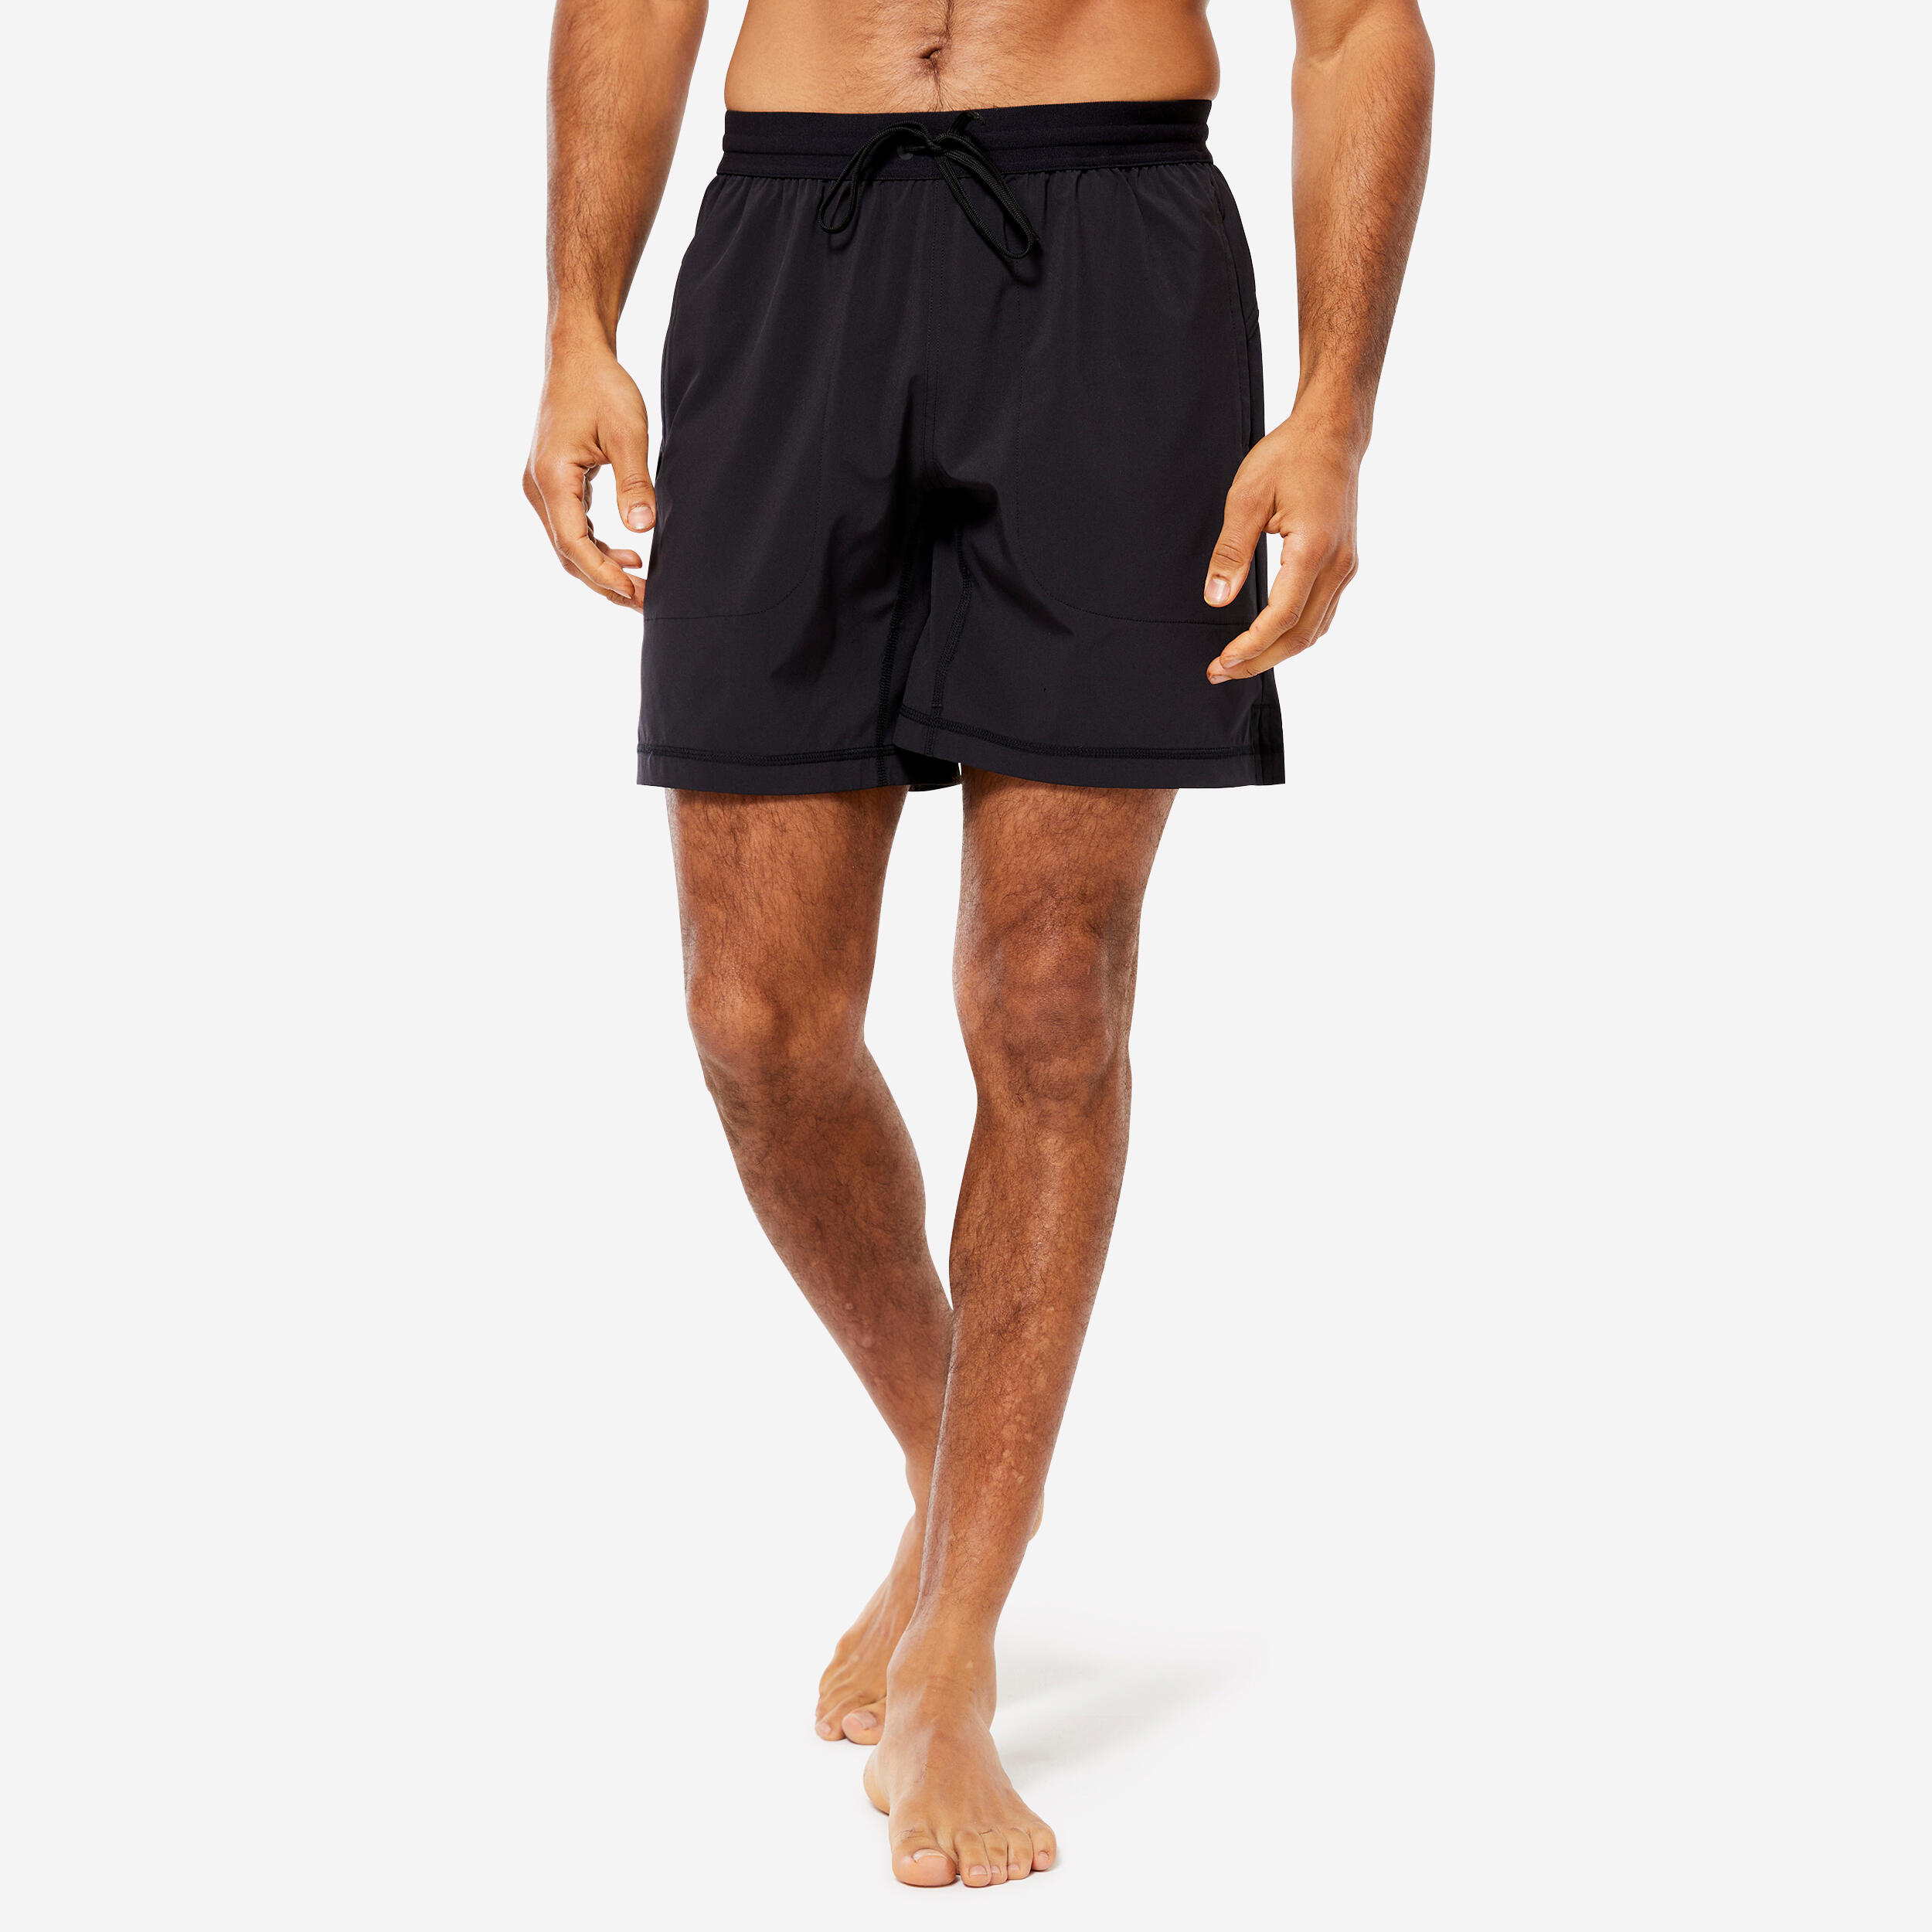 KIMJALY Men's Hot Yoga Ultra-Lightweight Shorts with Built-in Briefs - Black